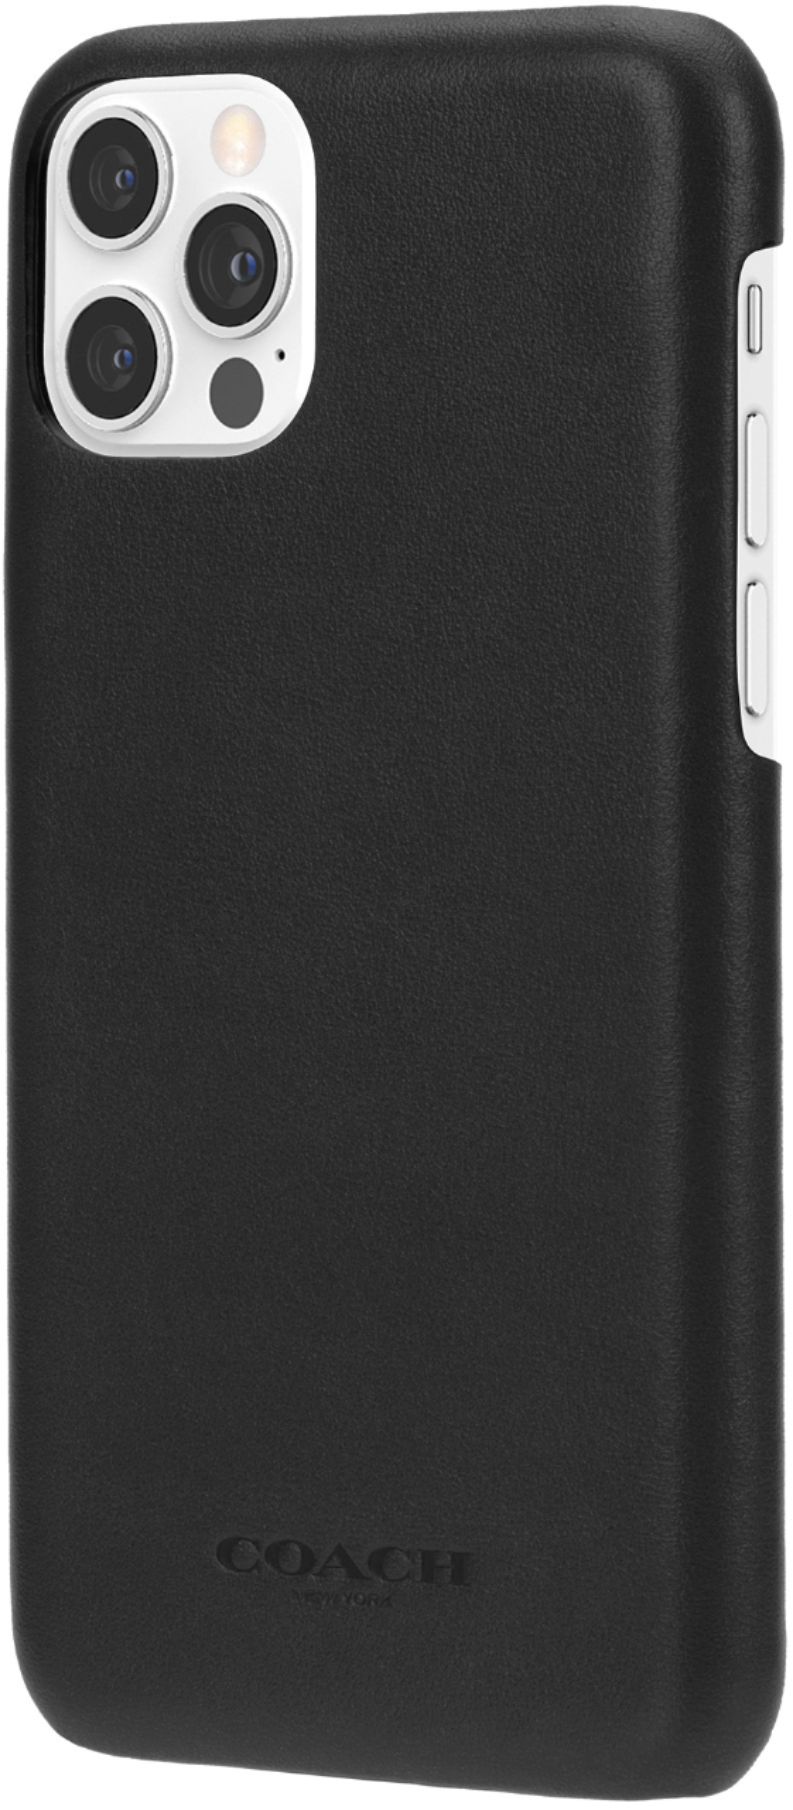 Best Buy: Coach Leather Slim Protective Case for iPhone 12 and iPhone 12 Pro  CIPH-058-BLK